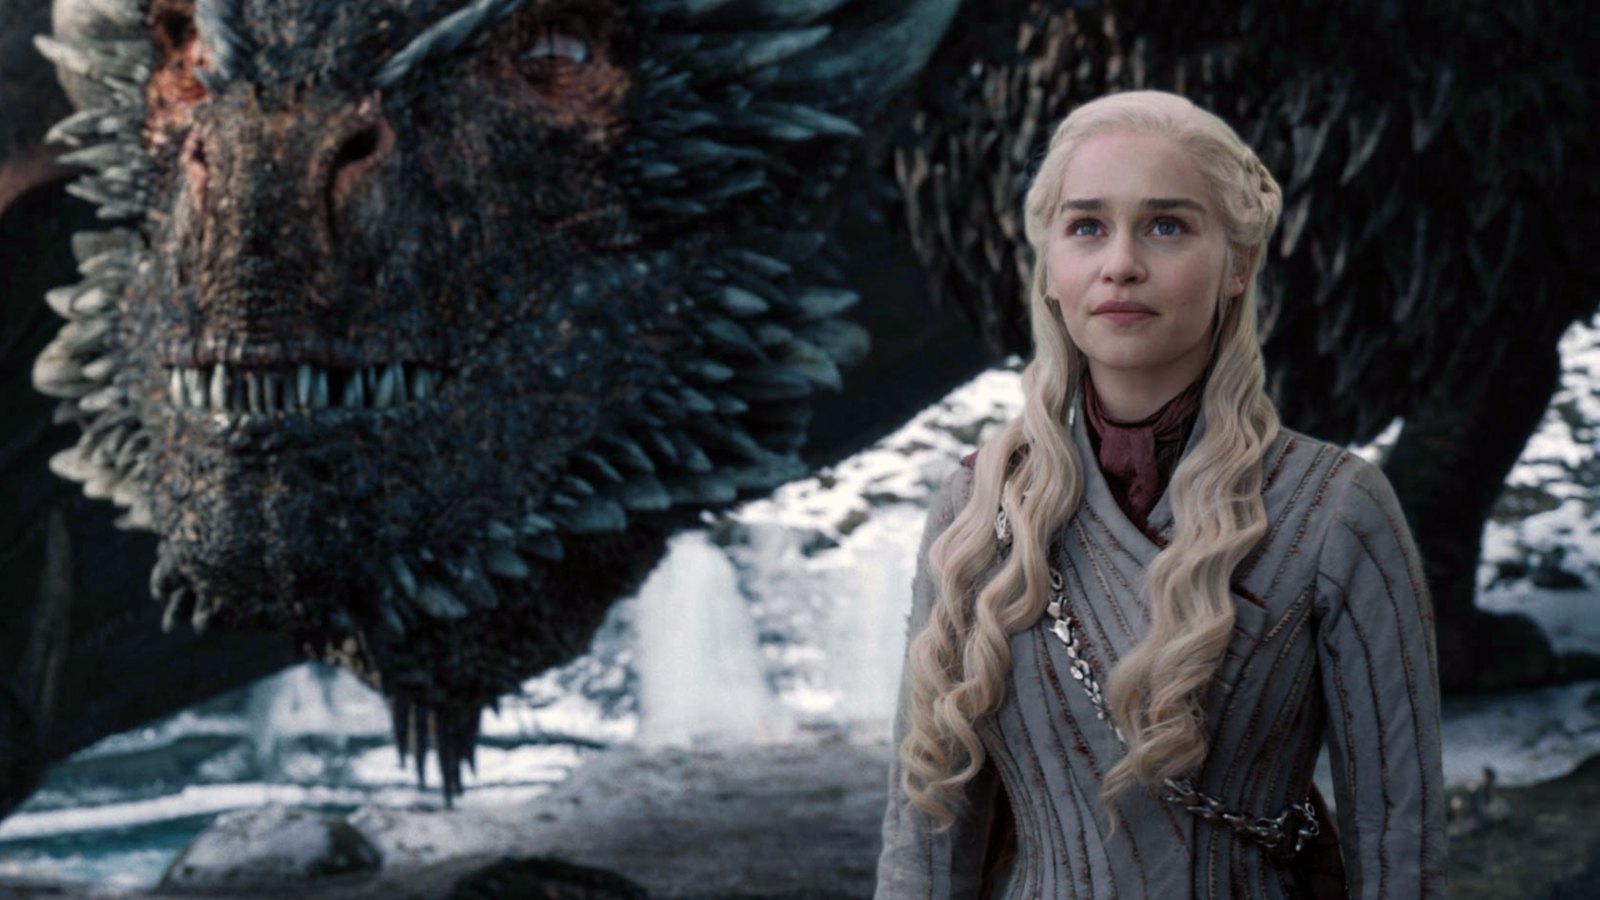 Brace Yourself ‘Game of Thrones’ Episode 5 Is Even ‘Bigger’ Than the Battle of Winterfell According to Emilia Clarke